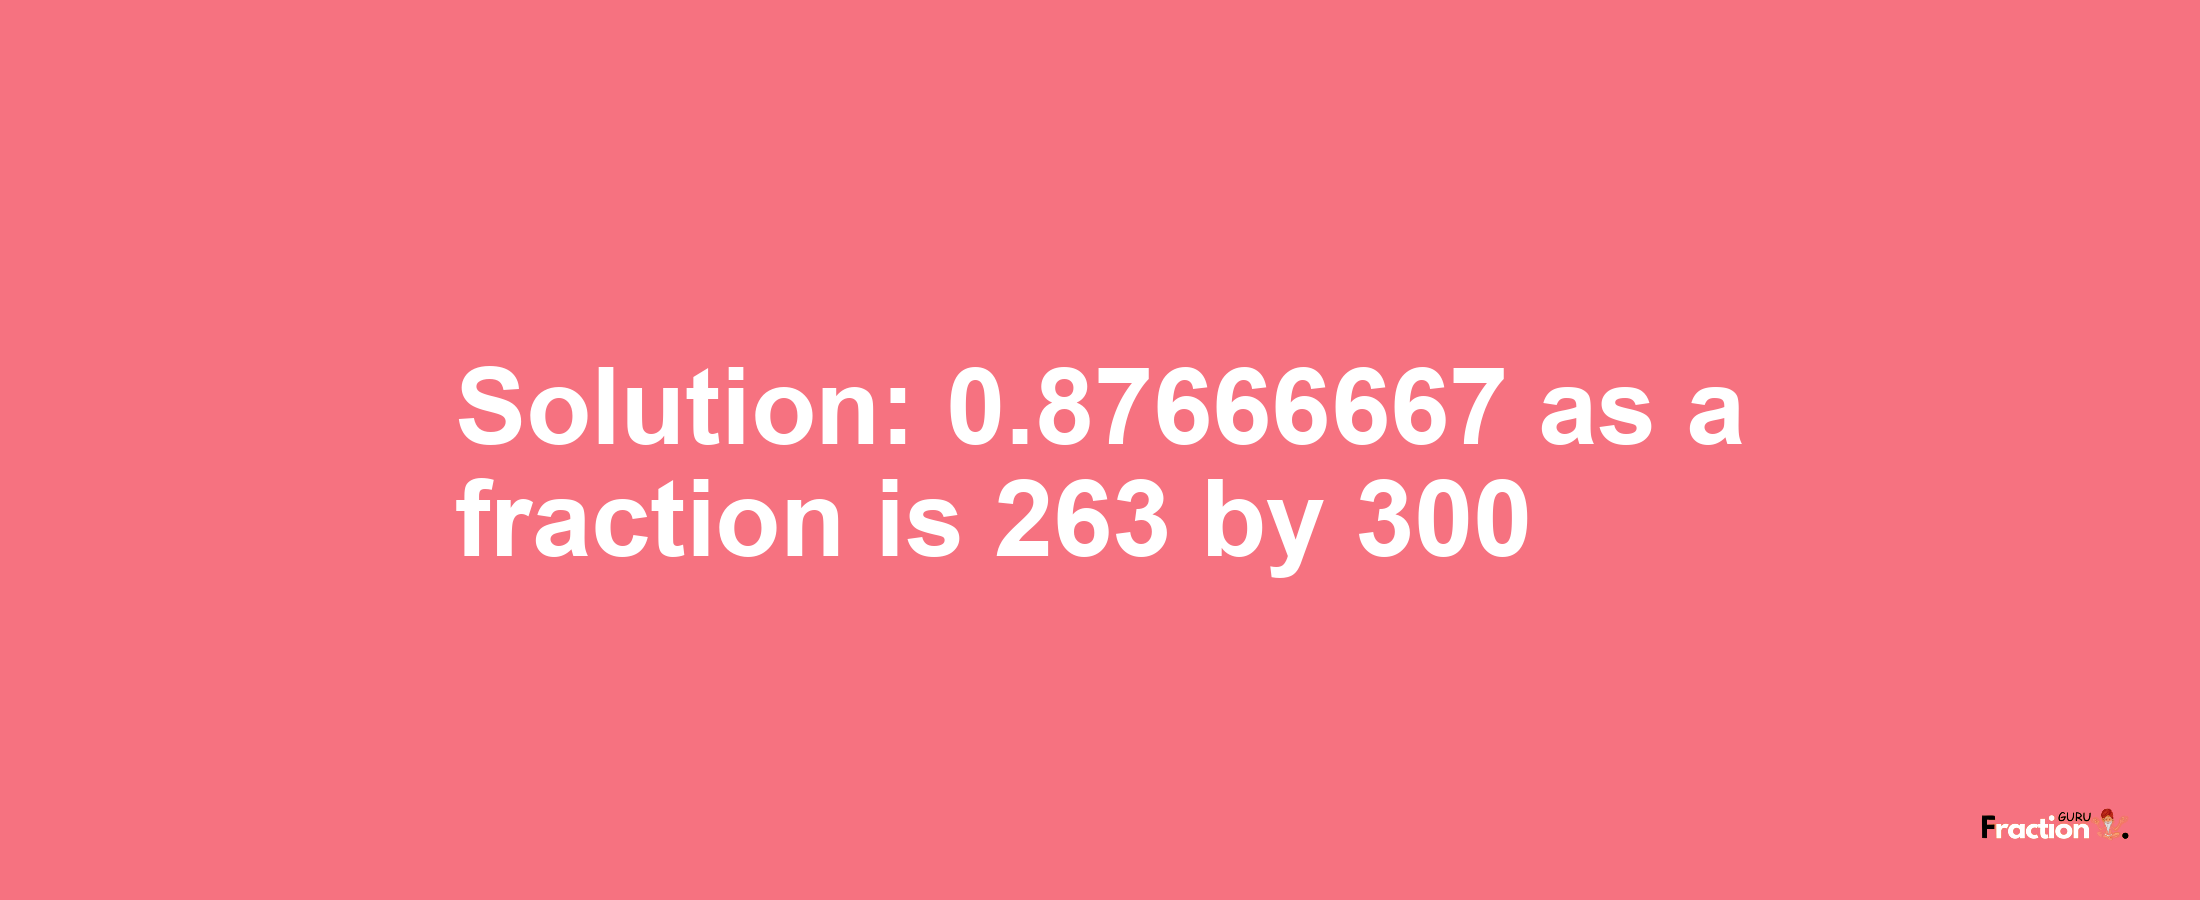 Solution:0.87666667 as a fraction is 263/300